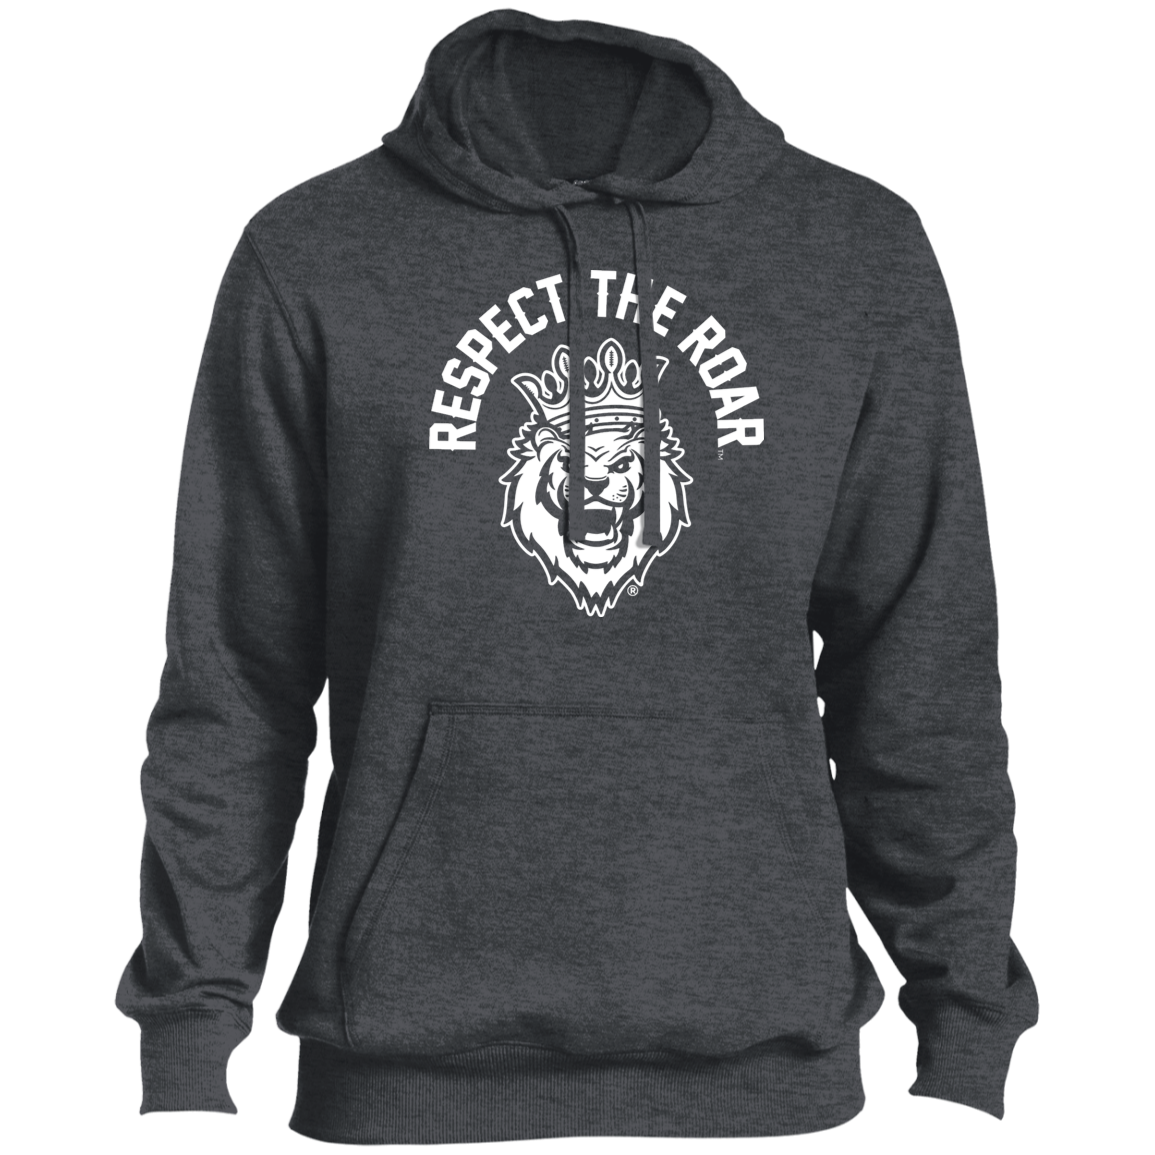 Respect The Roar® Men's Tall Pullover Hoodie